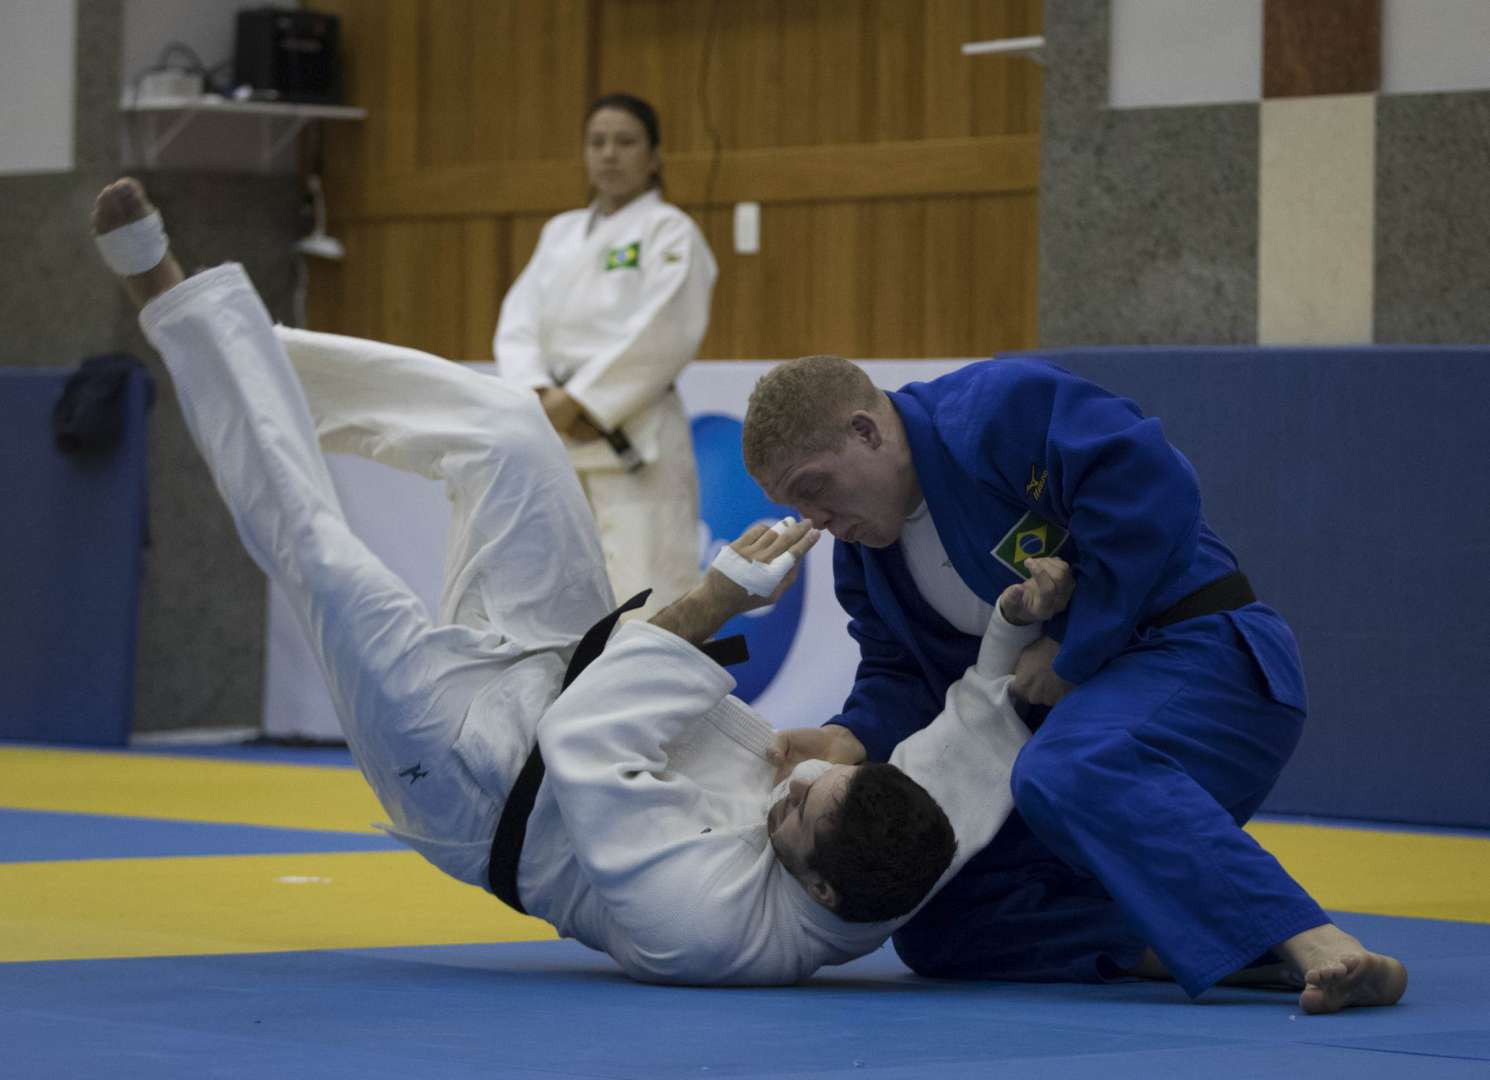 Brazil's judo team will next be in action at the International Judo Federation World Judo Tour event in Zagreb in July ©IJF